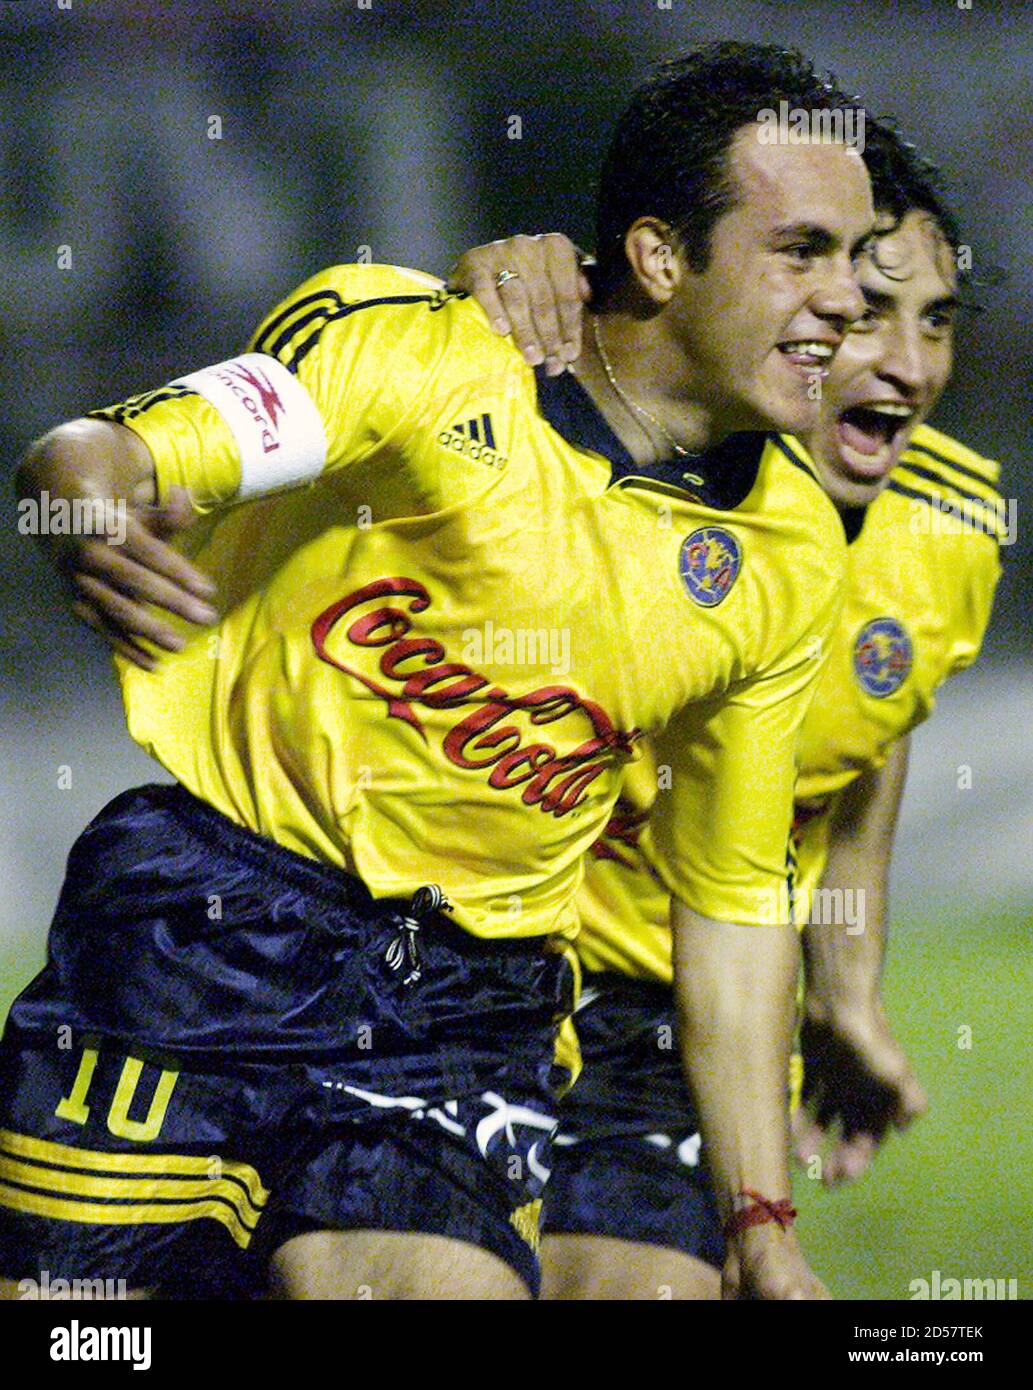 BLANCO AND TEAMMATE ESTAY FROM AMERICA CELEBRATES A GOAL AGAINST  CORINTHIANS AT LIBERTADORES CUP MATCH IN SAO PAULO. Mexican soccer player Cuauhtemoc  Blanco (L) celebrates with teammate Fabian Estay against Brazilian team